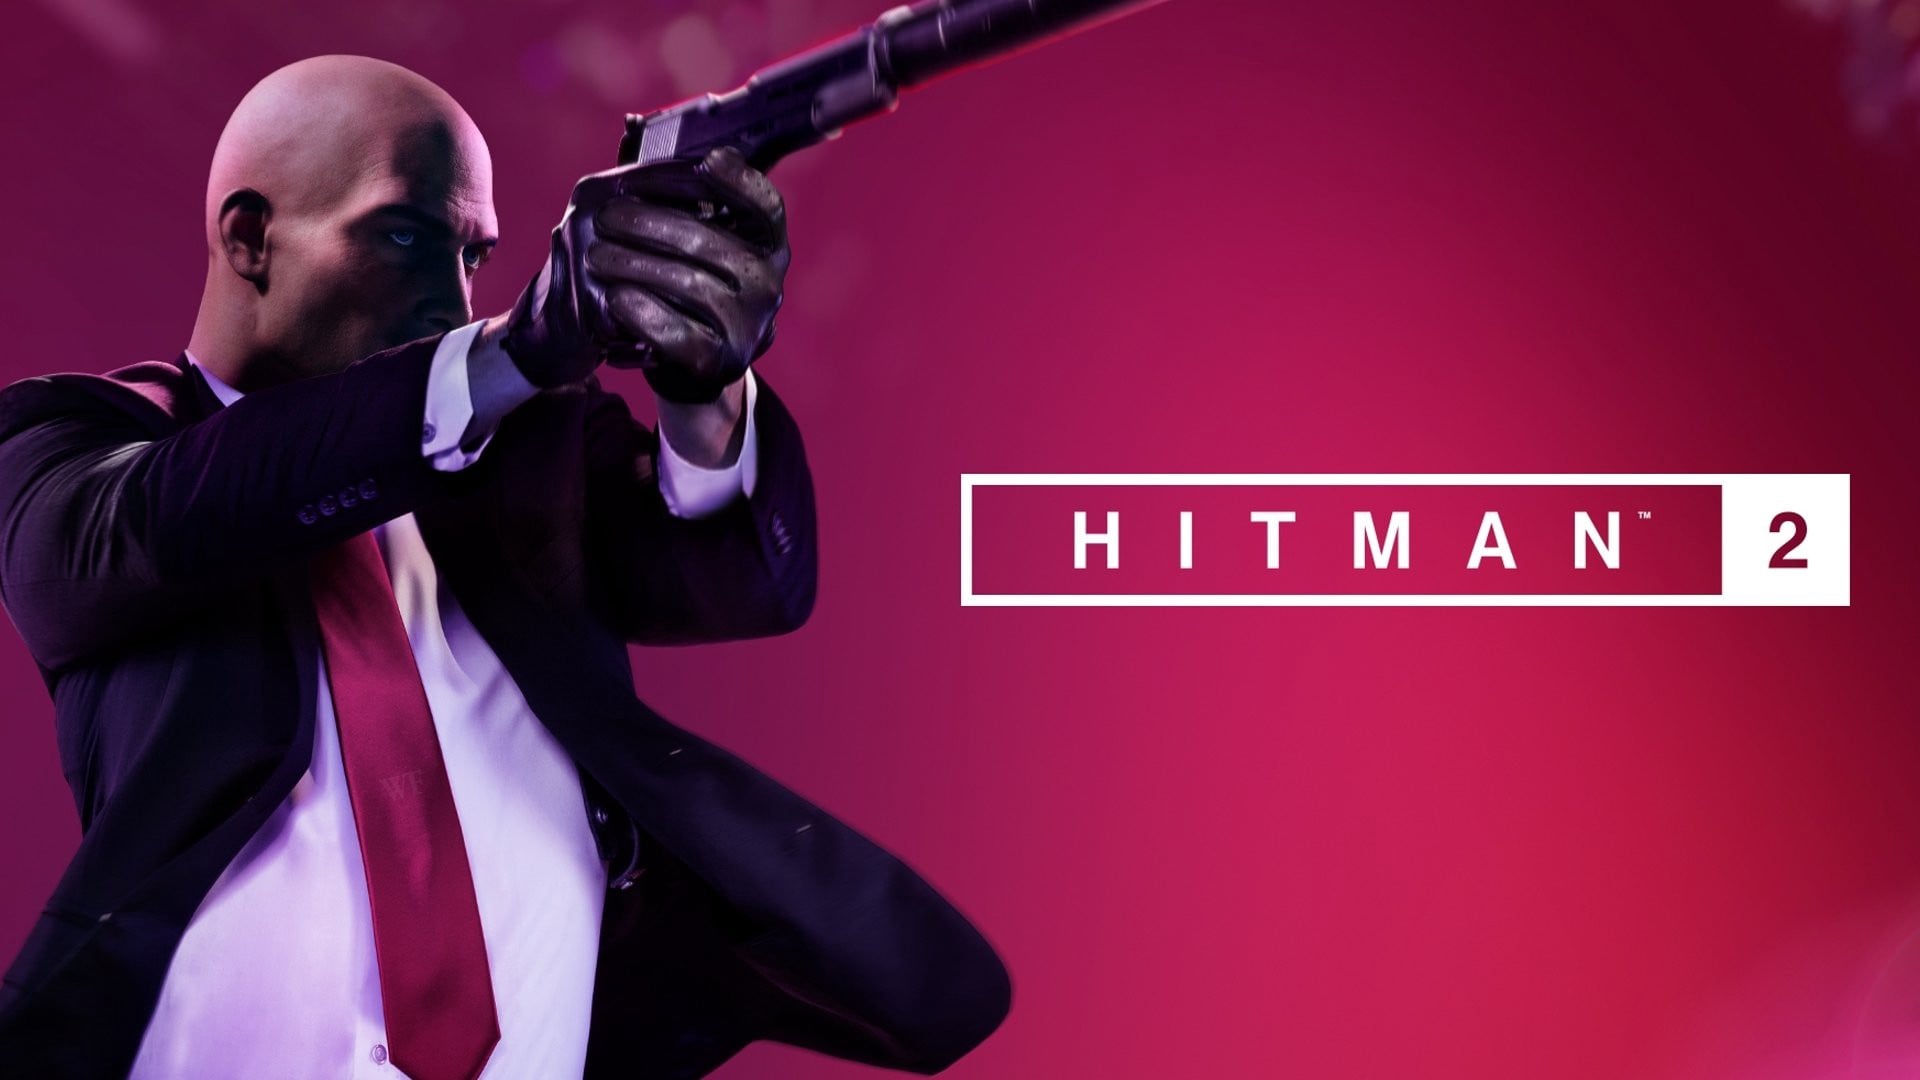 Is Hitman 2 the full game?